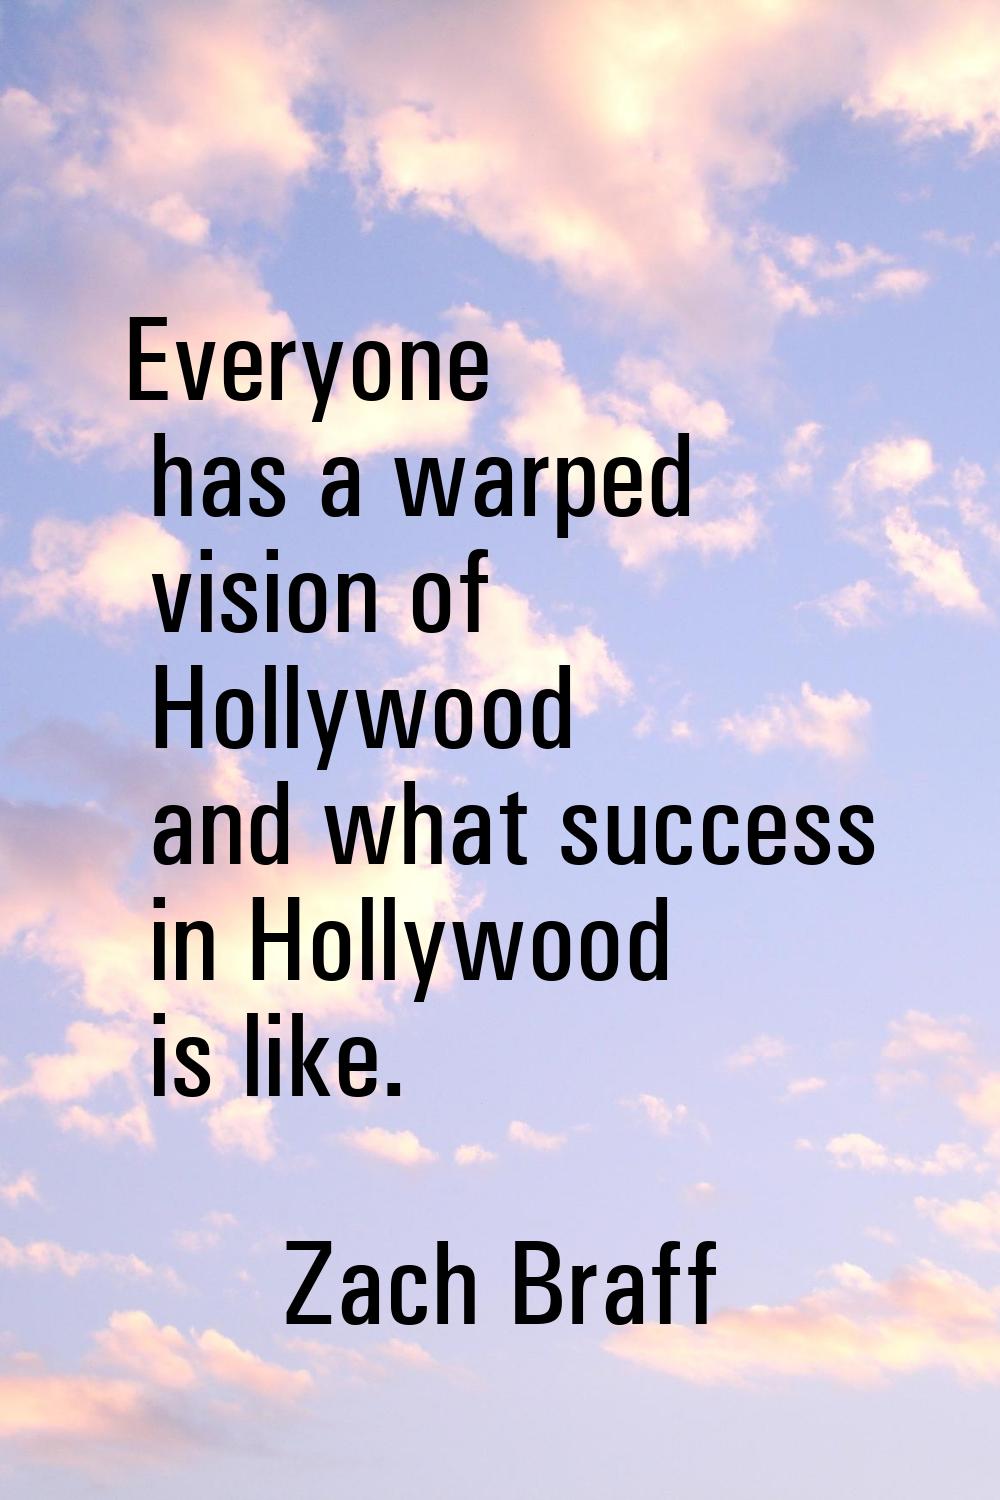 Everyone has a warped vision of Hollywood and what success in Hollywood is like.